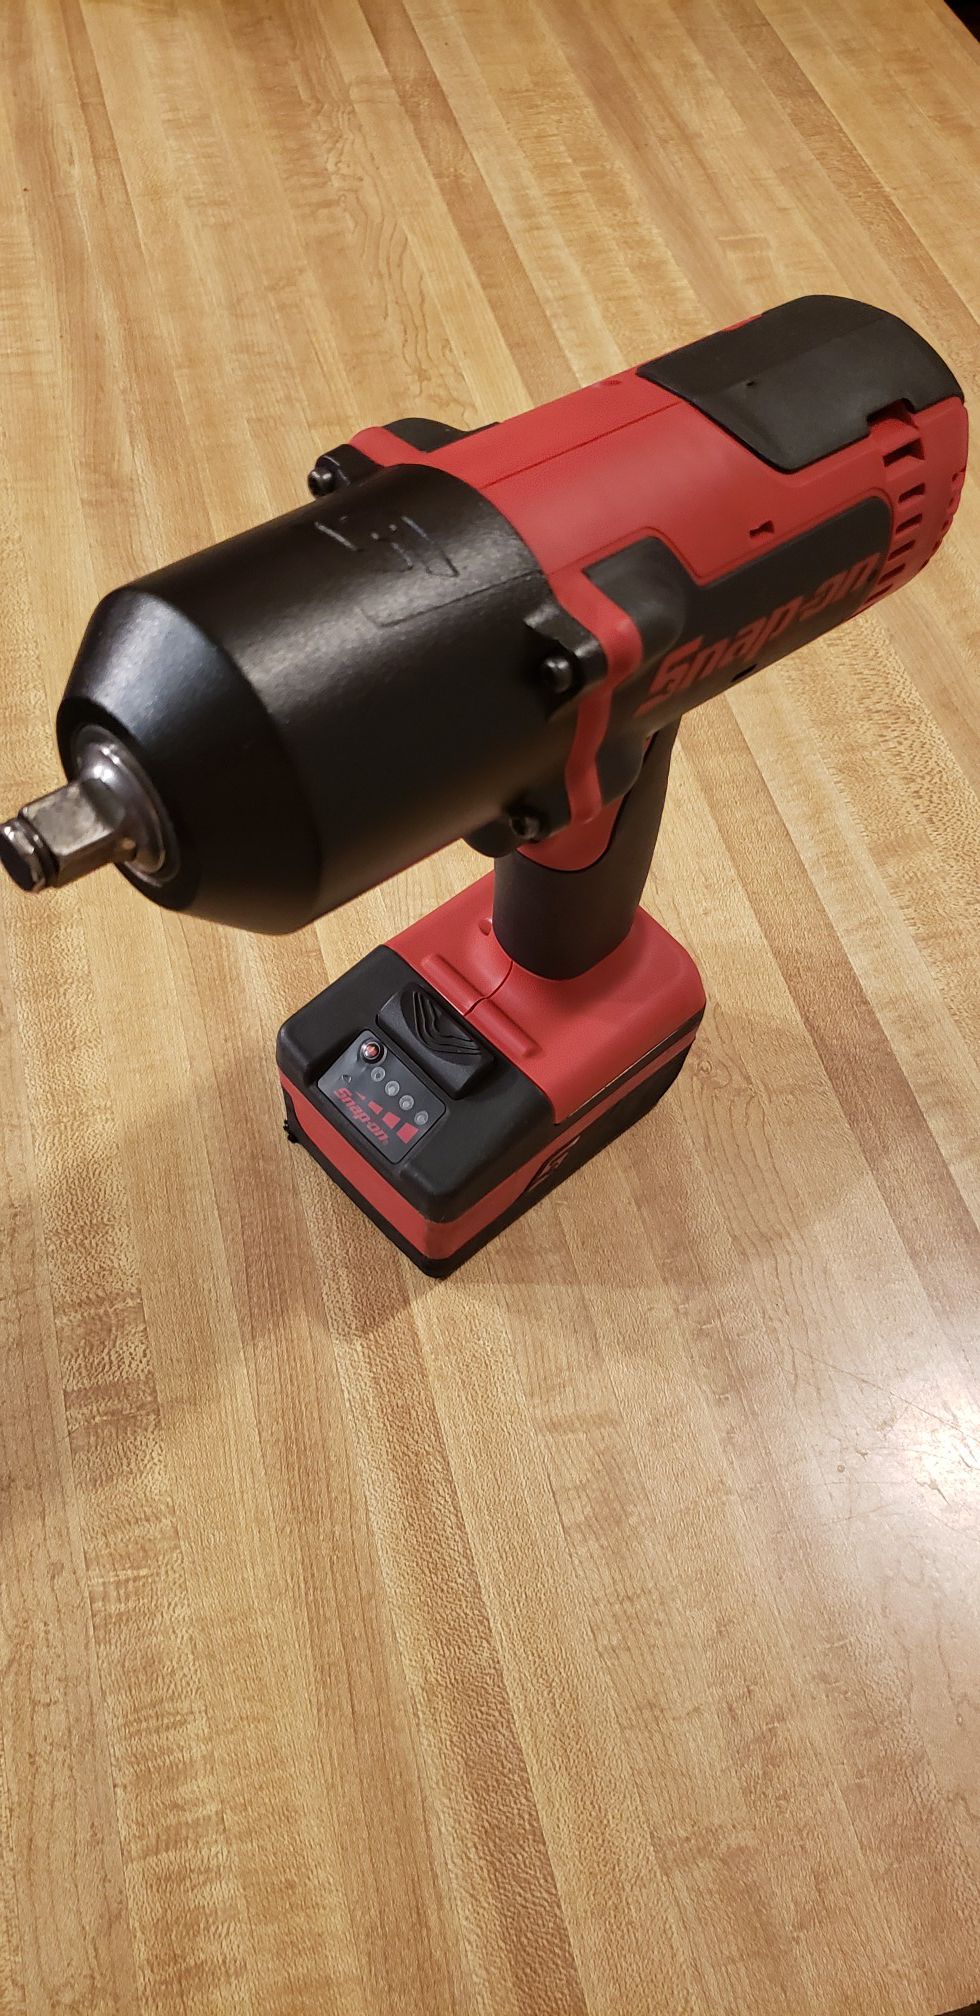 Snap-On usa tools Monterlithium cordless impact wrench with battery (like new)